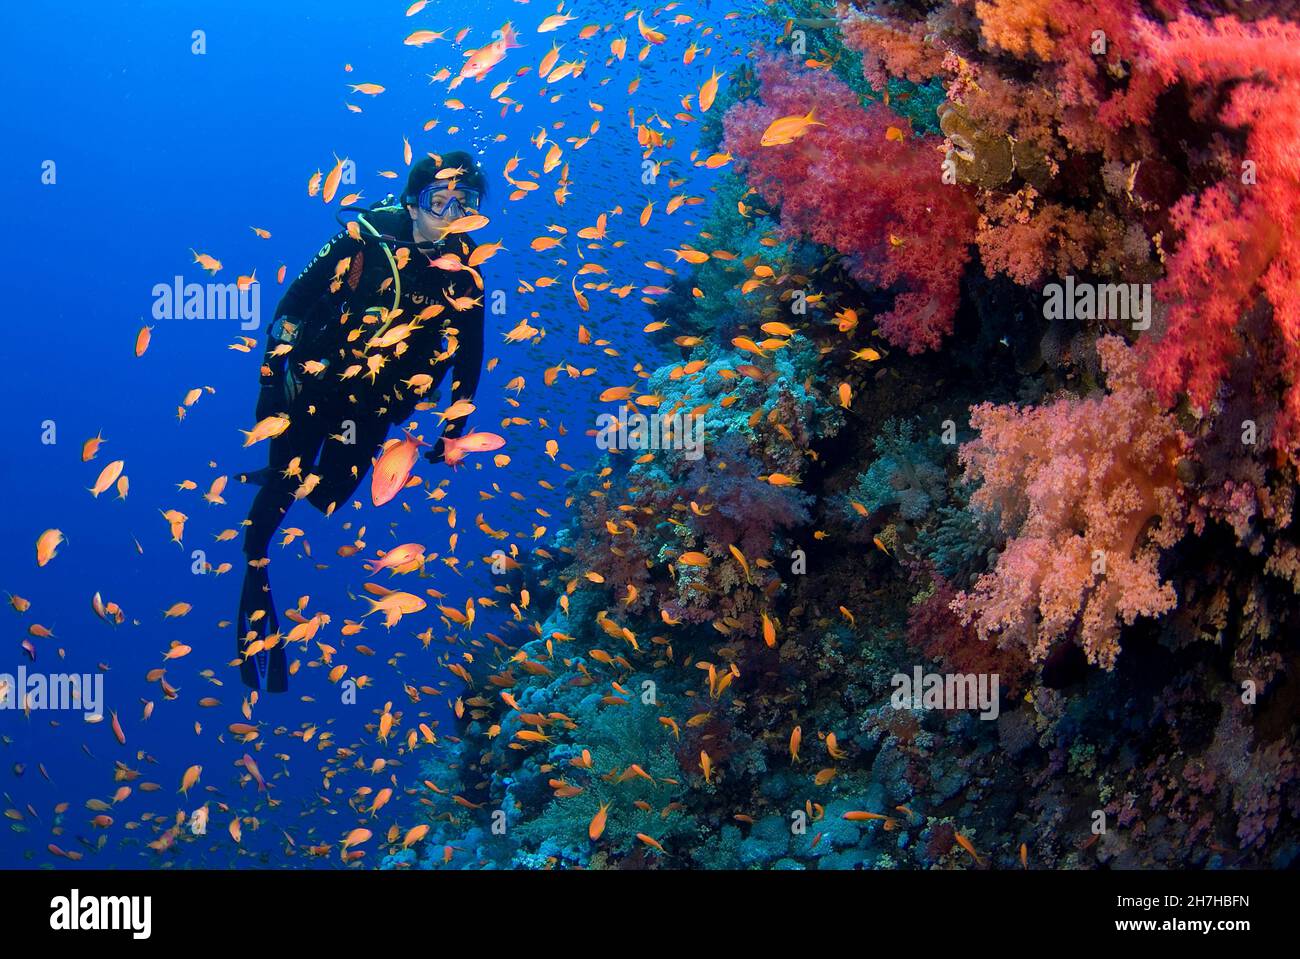 EGYPT. RED SEA. DIVER AND SOFT CORAL. Stock Photo